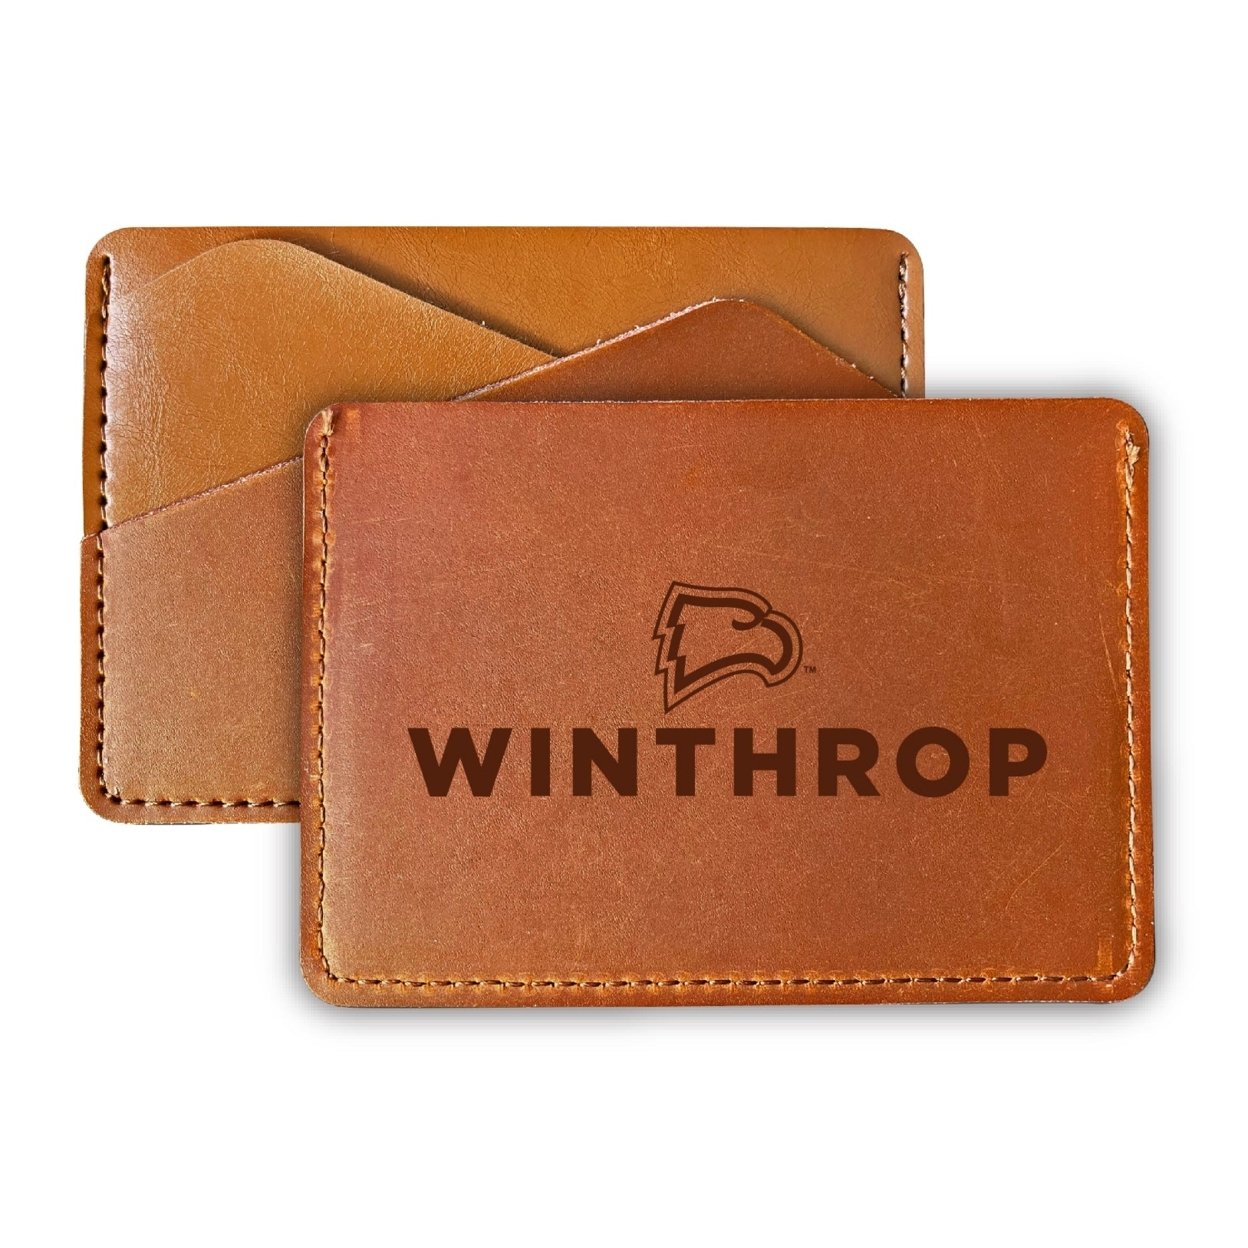 Winthrop University College Leather Card Holder Wallet